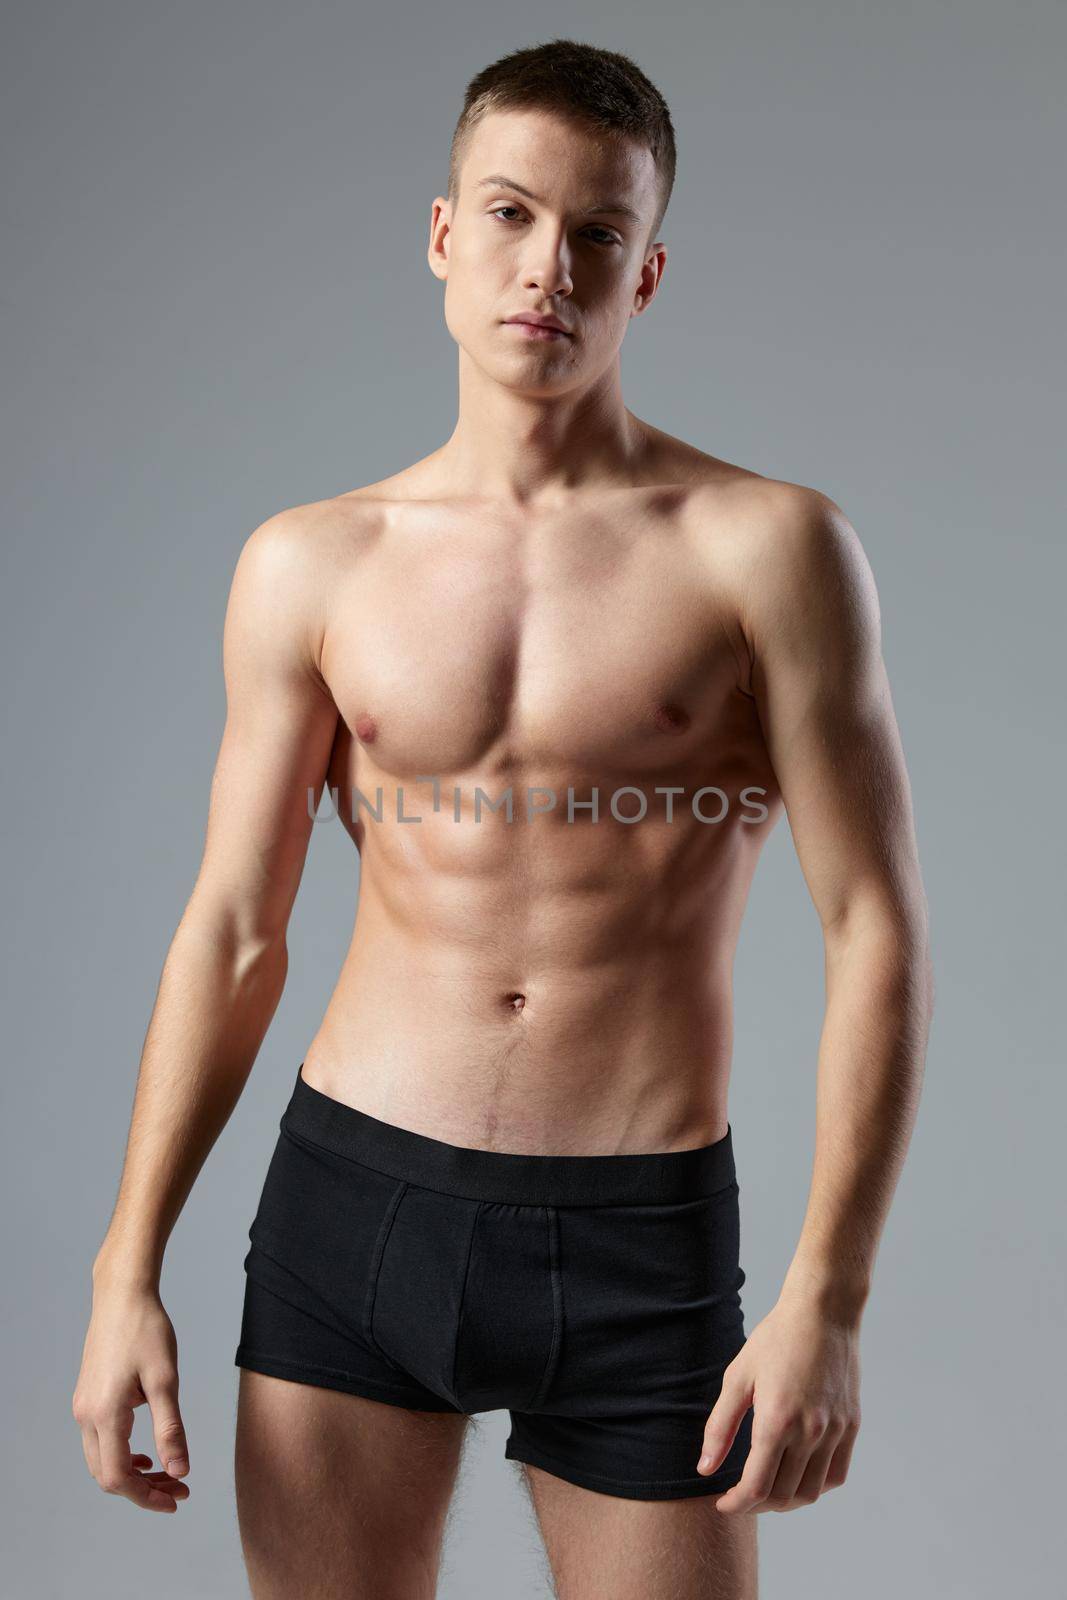 athletic male bodybuilder with pumped up abs black panties cropped view studio. High quality photo